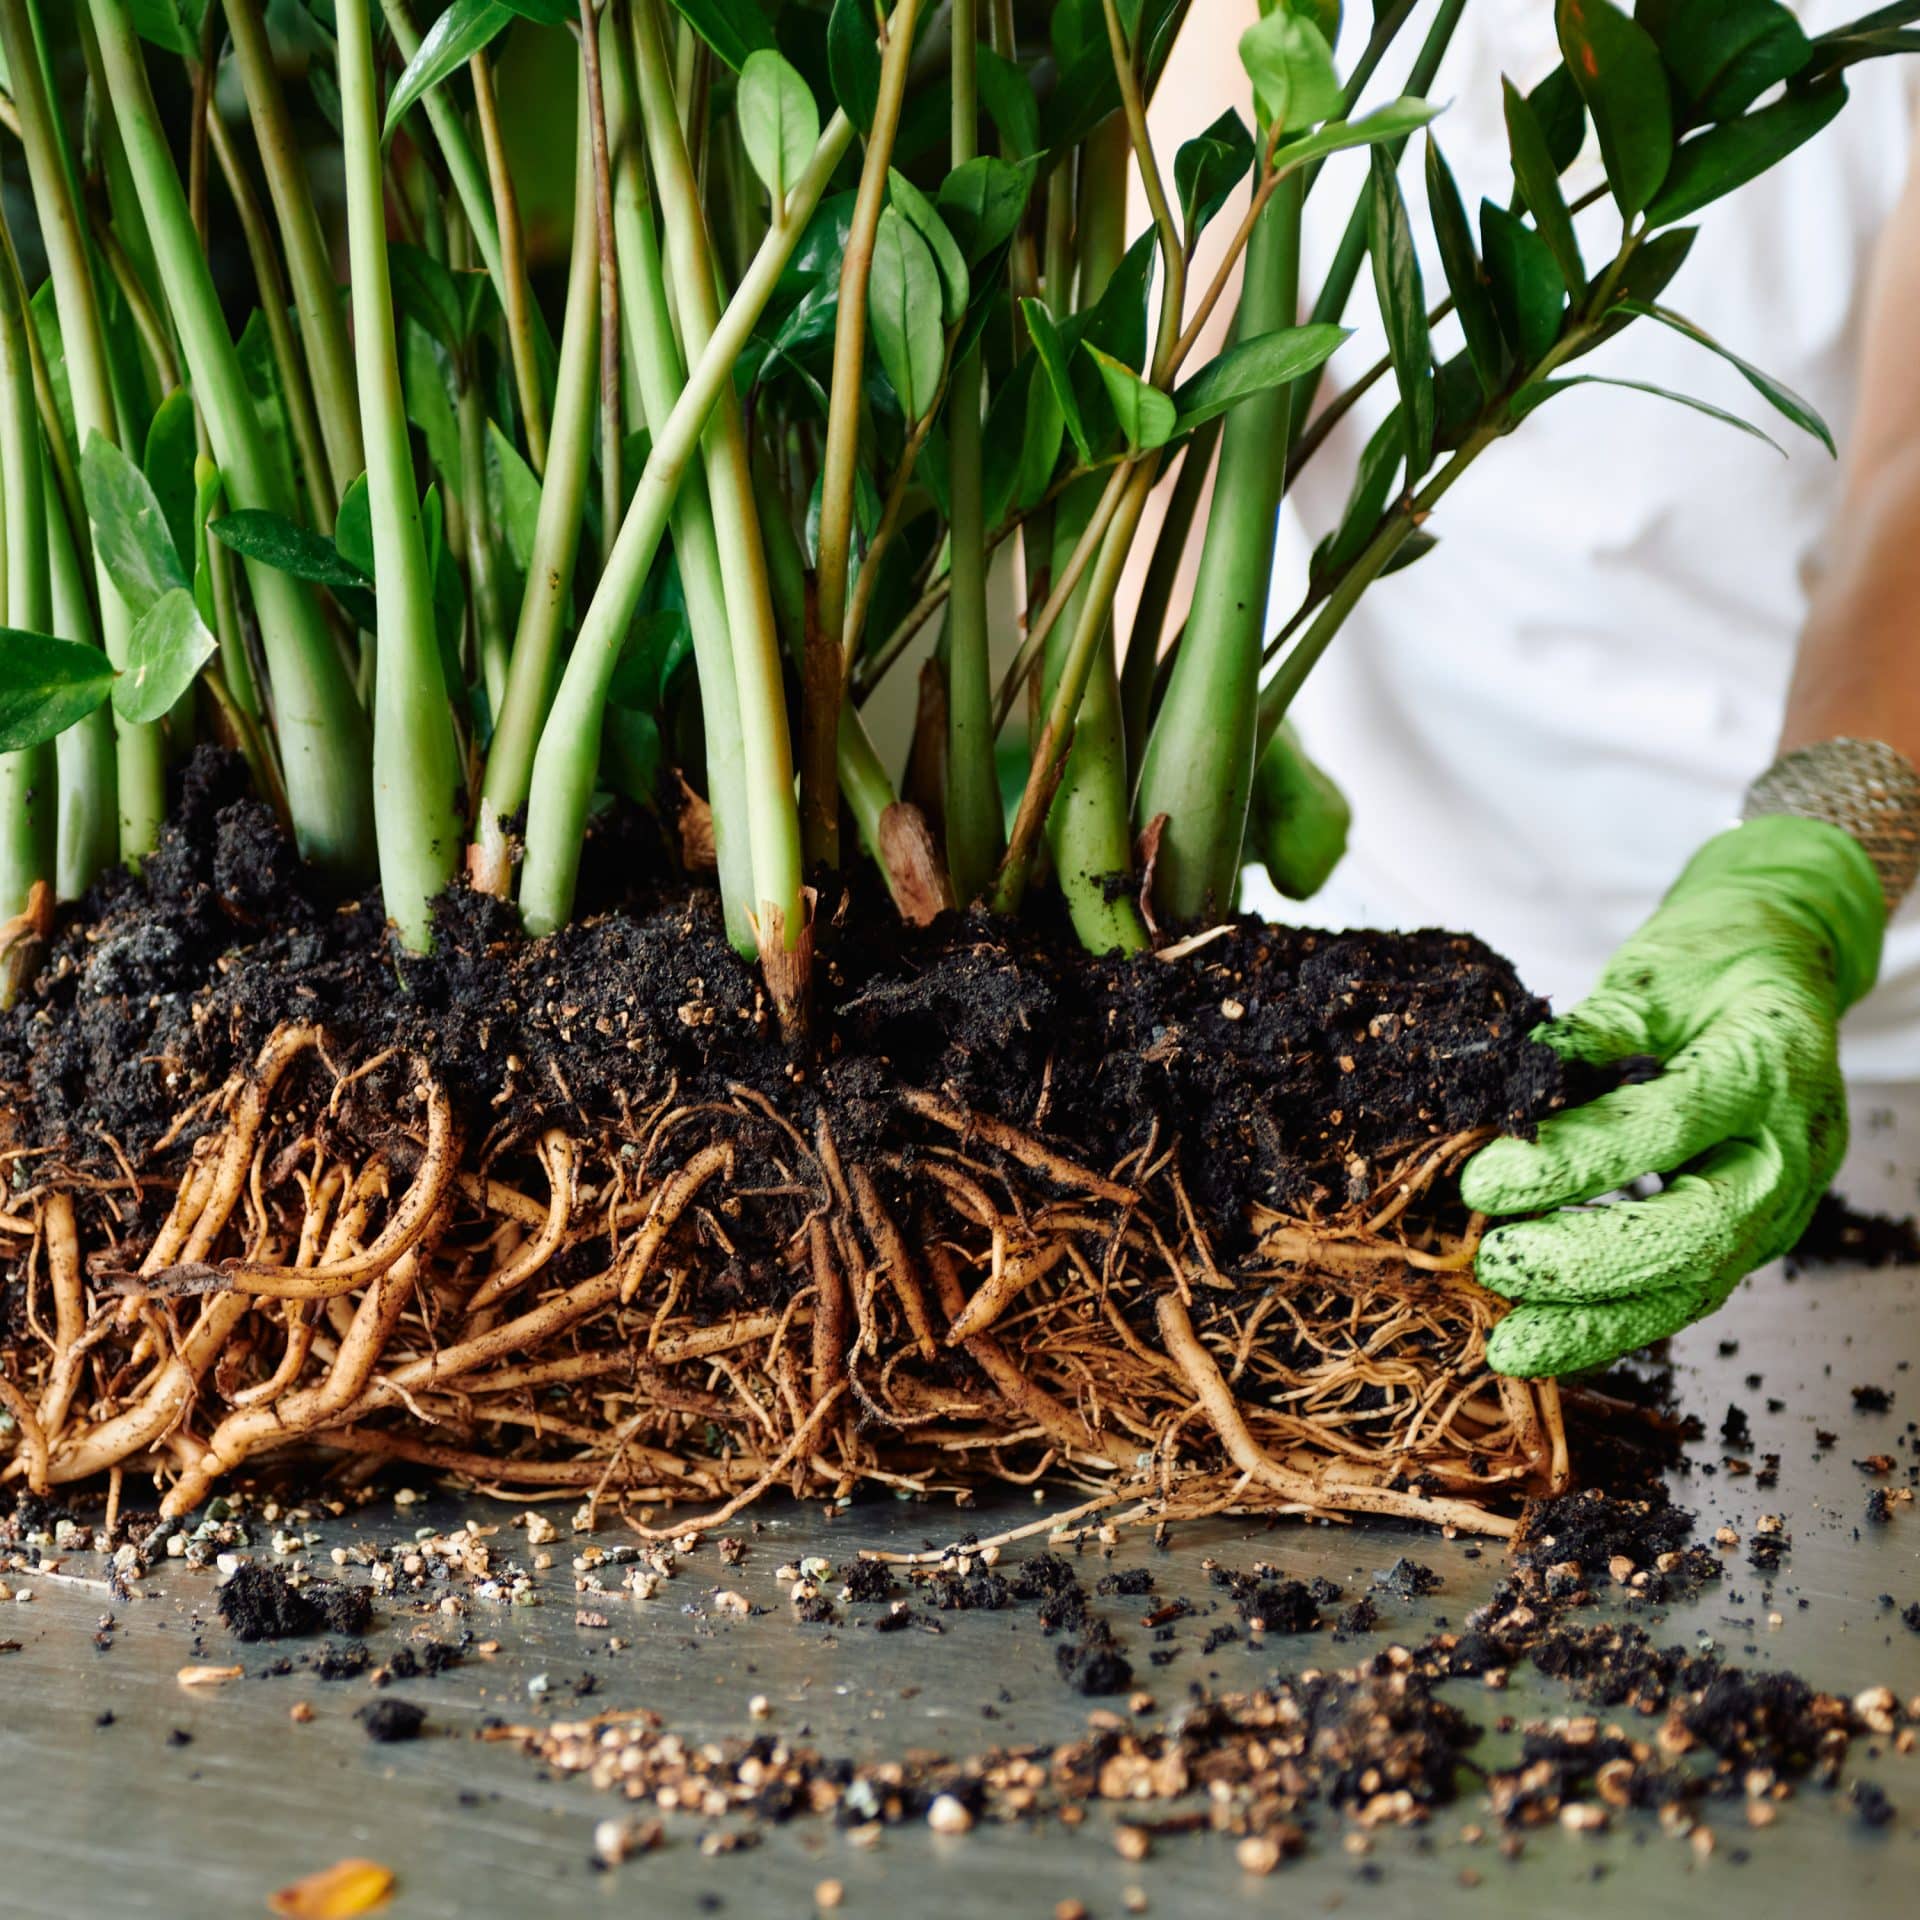 Close-up of a ZZ plant's root system being examined by Juliette wearing green gardening gloves. The image shows thick, tangled roots and moist soil, with Juliette's hand gently touching the roots. Stems and leaves of the plant stretch upward, partially visible in the frame.